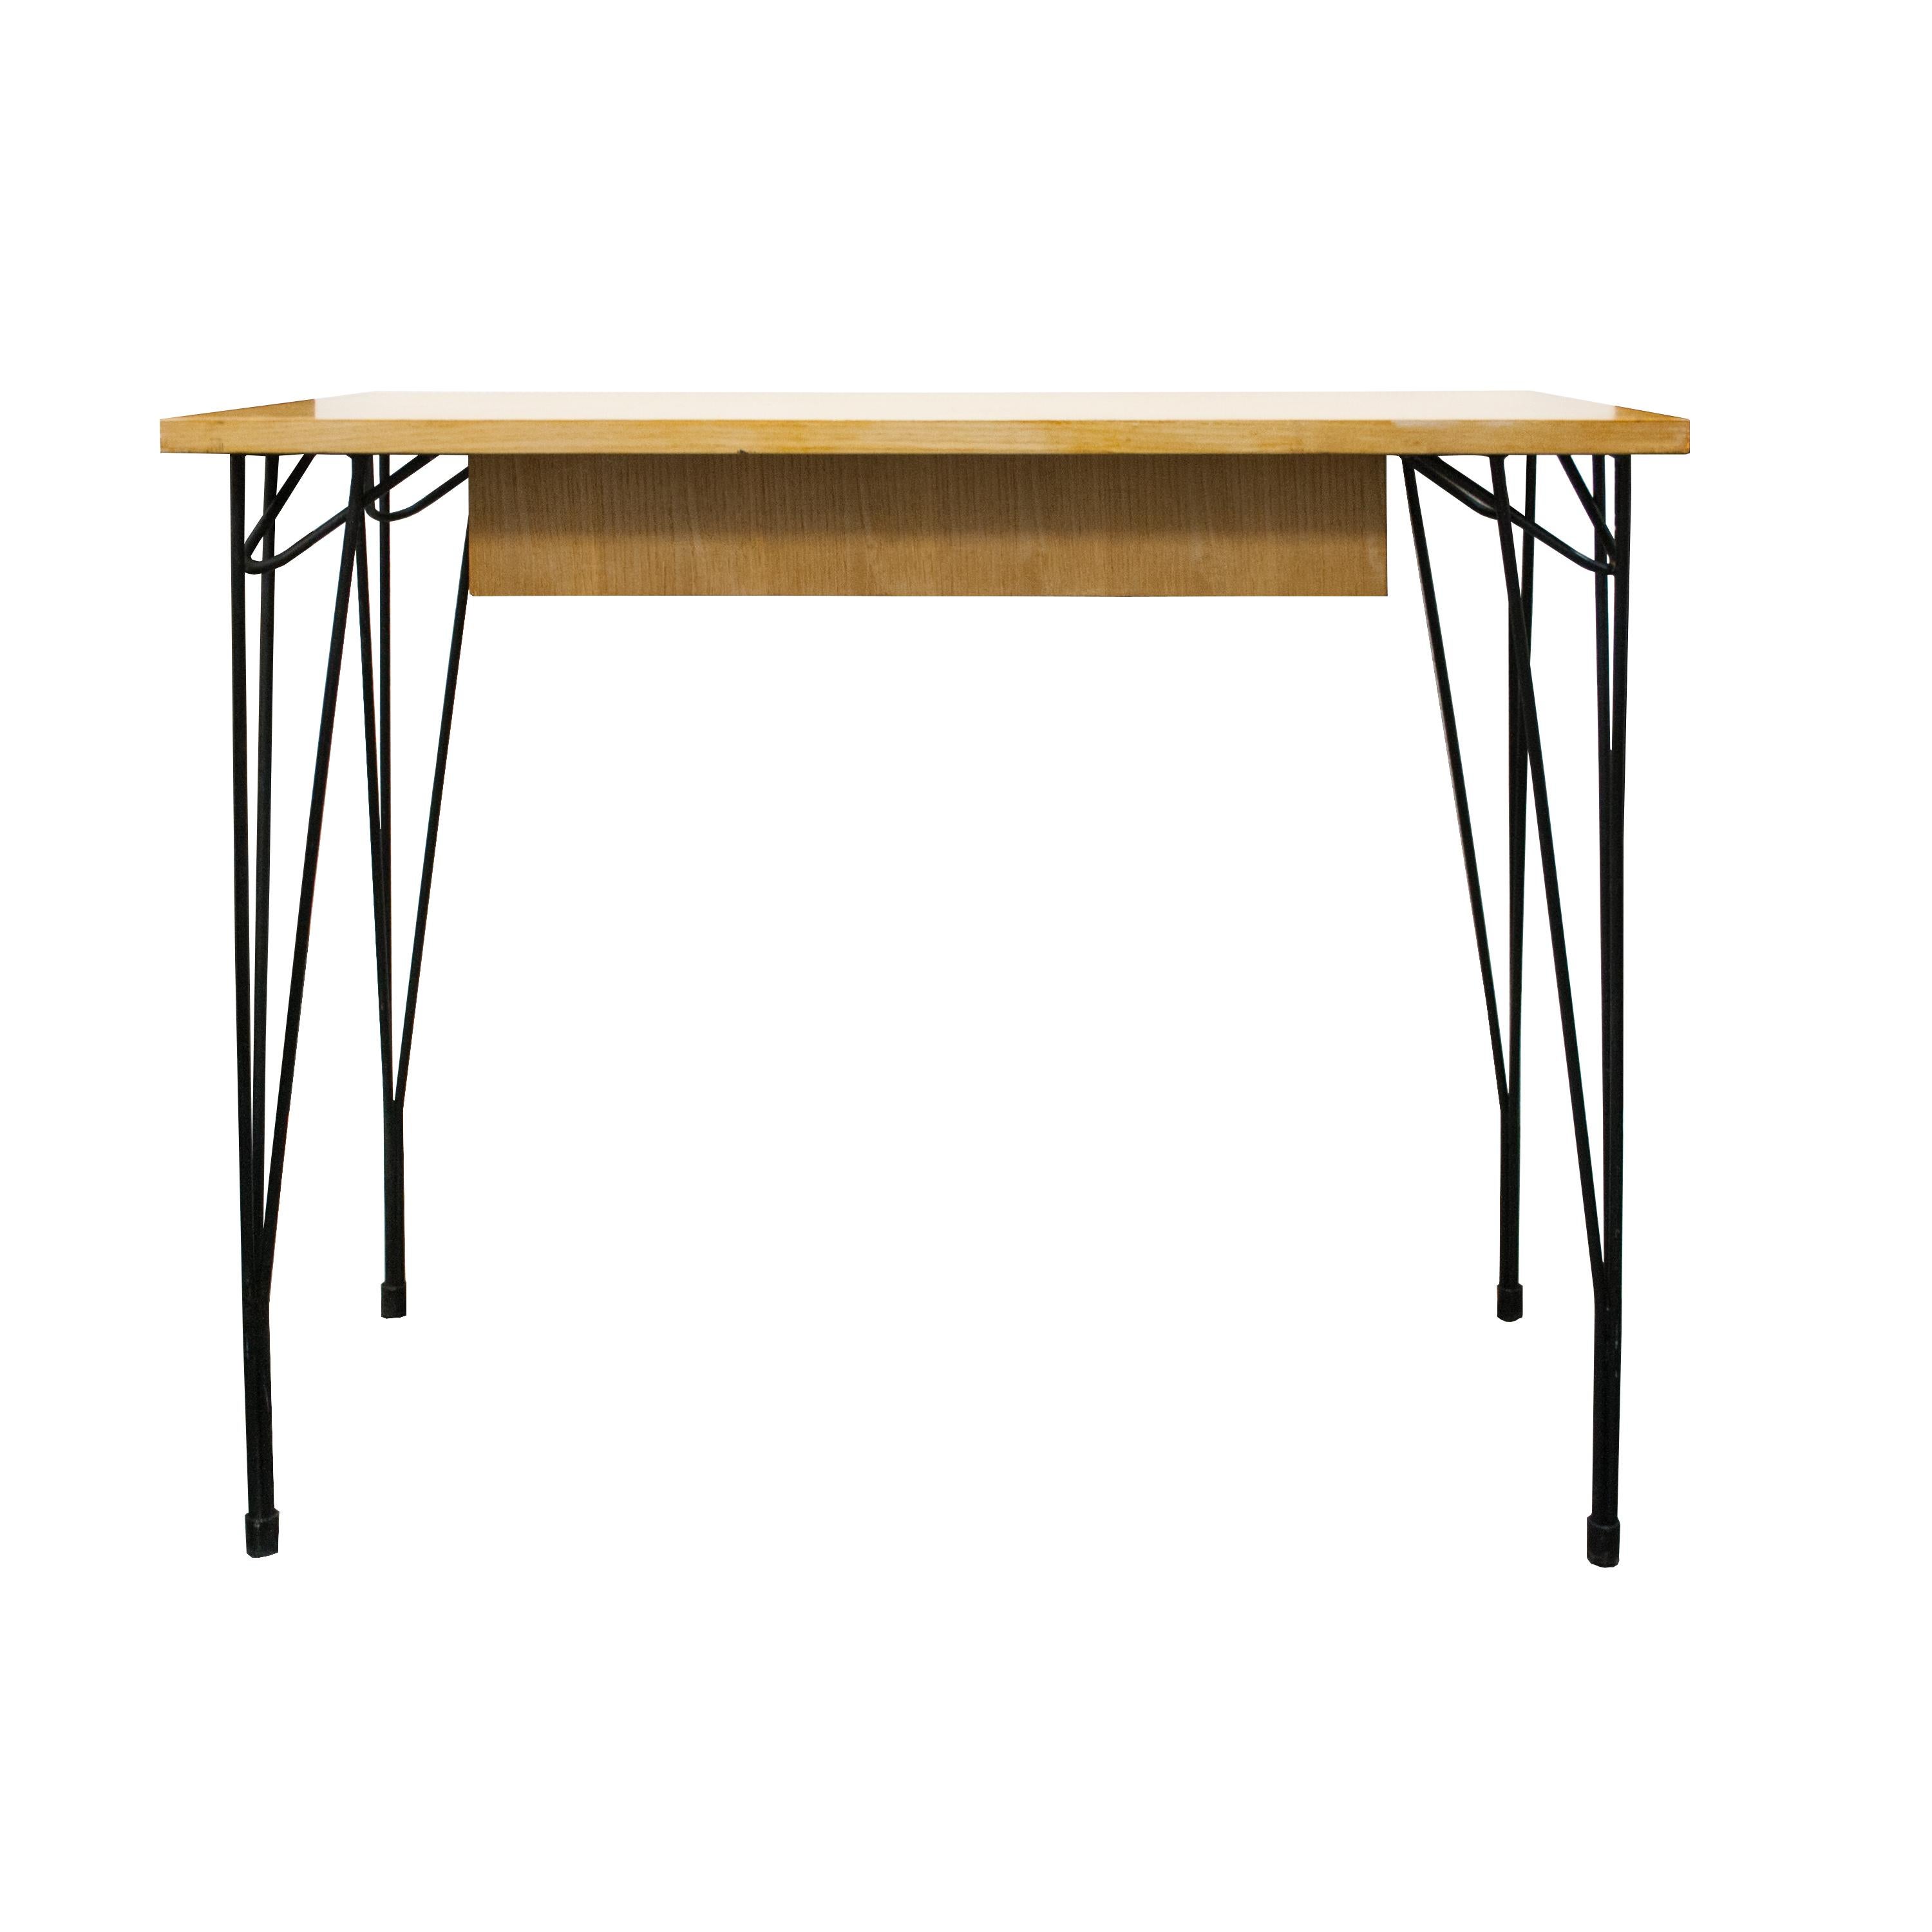 1950's original Mid-Century Modern desk edited by ISA Bergamo. 
The desk is composed of a table with a drawer and open space beneath made of oak wood. Legs made of curved and black lacquered iron rod.